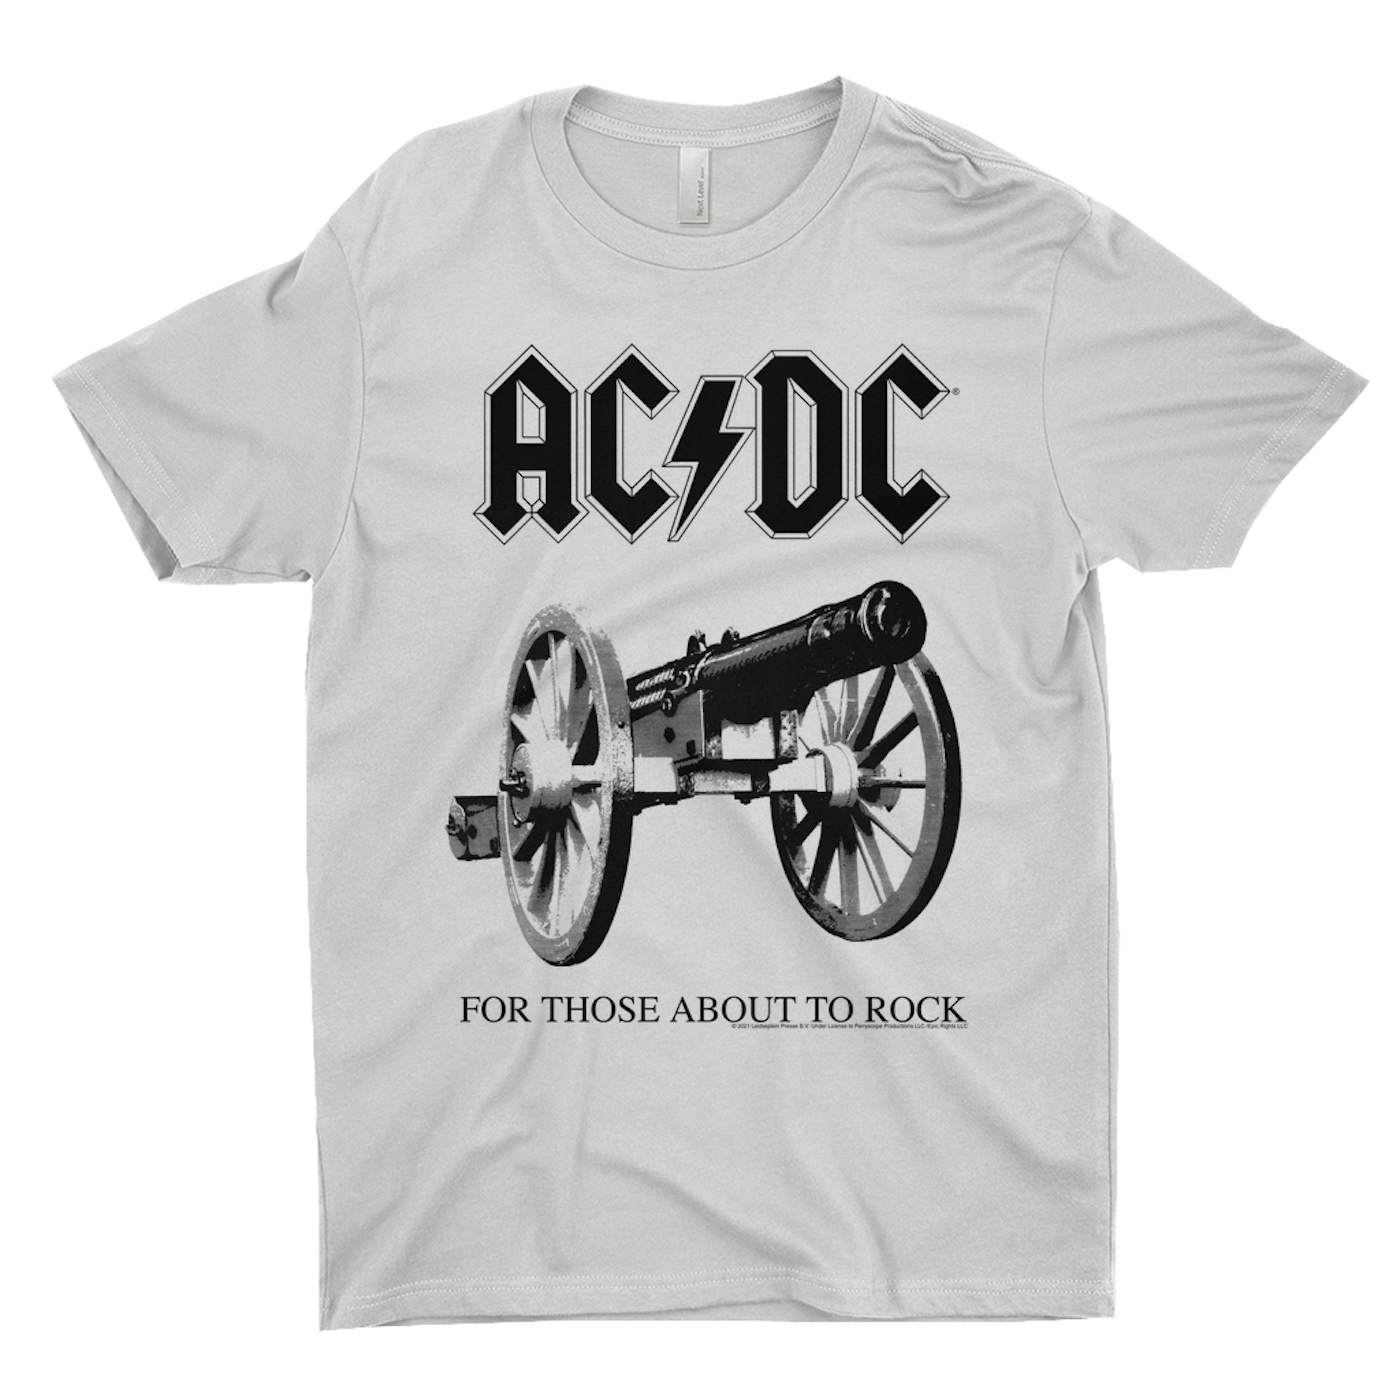 For Those Cannon To Image Rock Shirt About | AC/DC Black T-Shirt